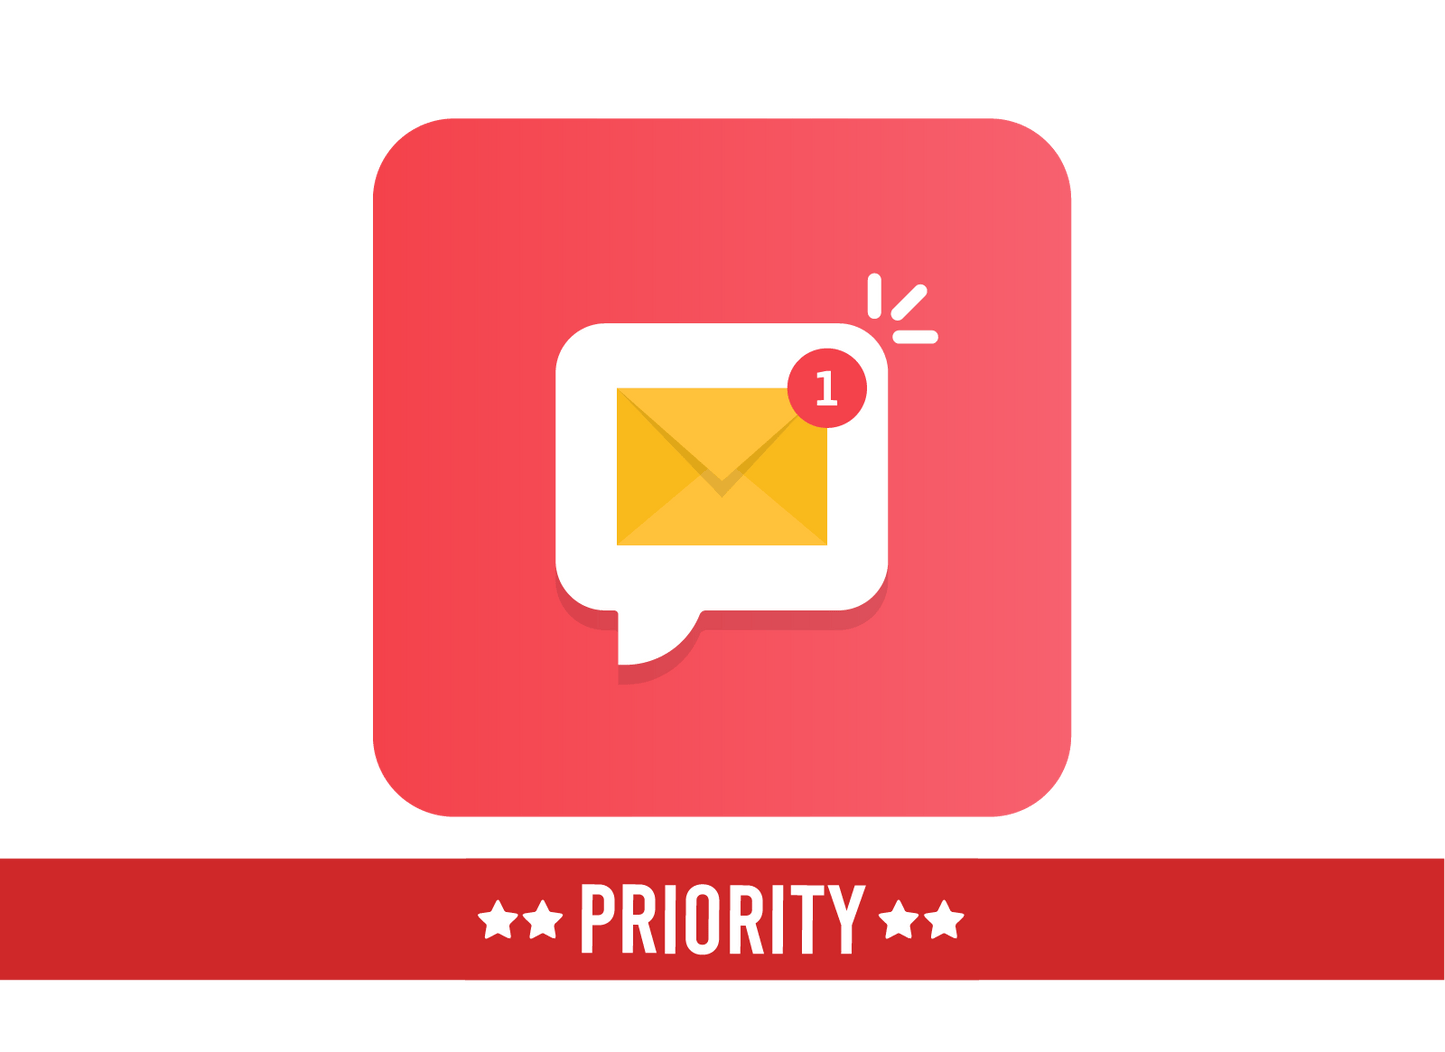 Email Support - Priority